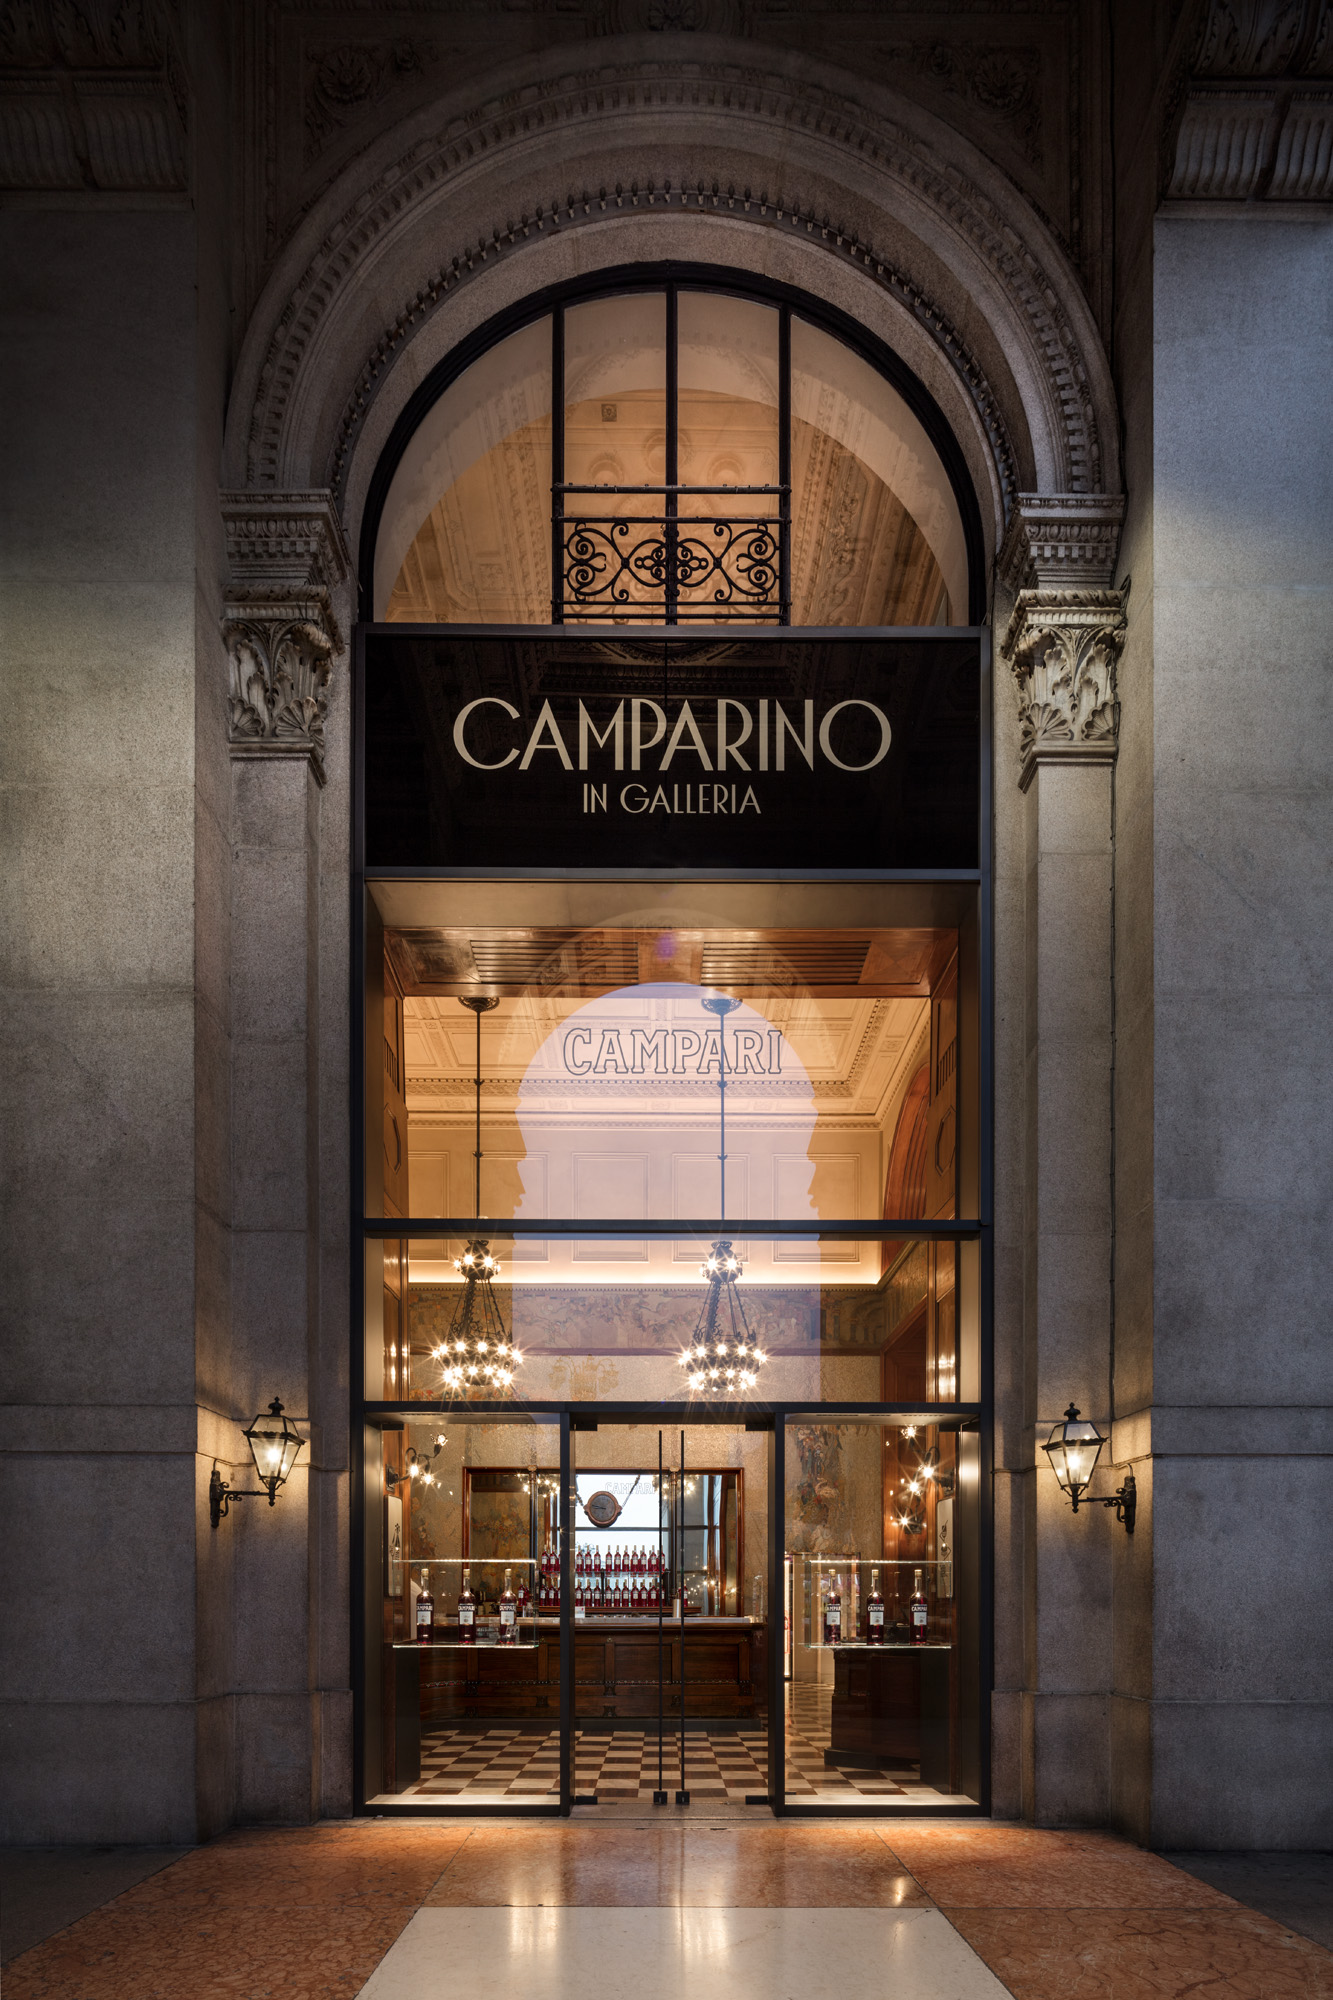 Camparino in Galleria in the Piazza Duomo retains the Art Nouveau details with a subtle, delicate intervention by Lissoni Associati. Photography © Santi Caleca.